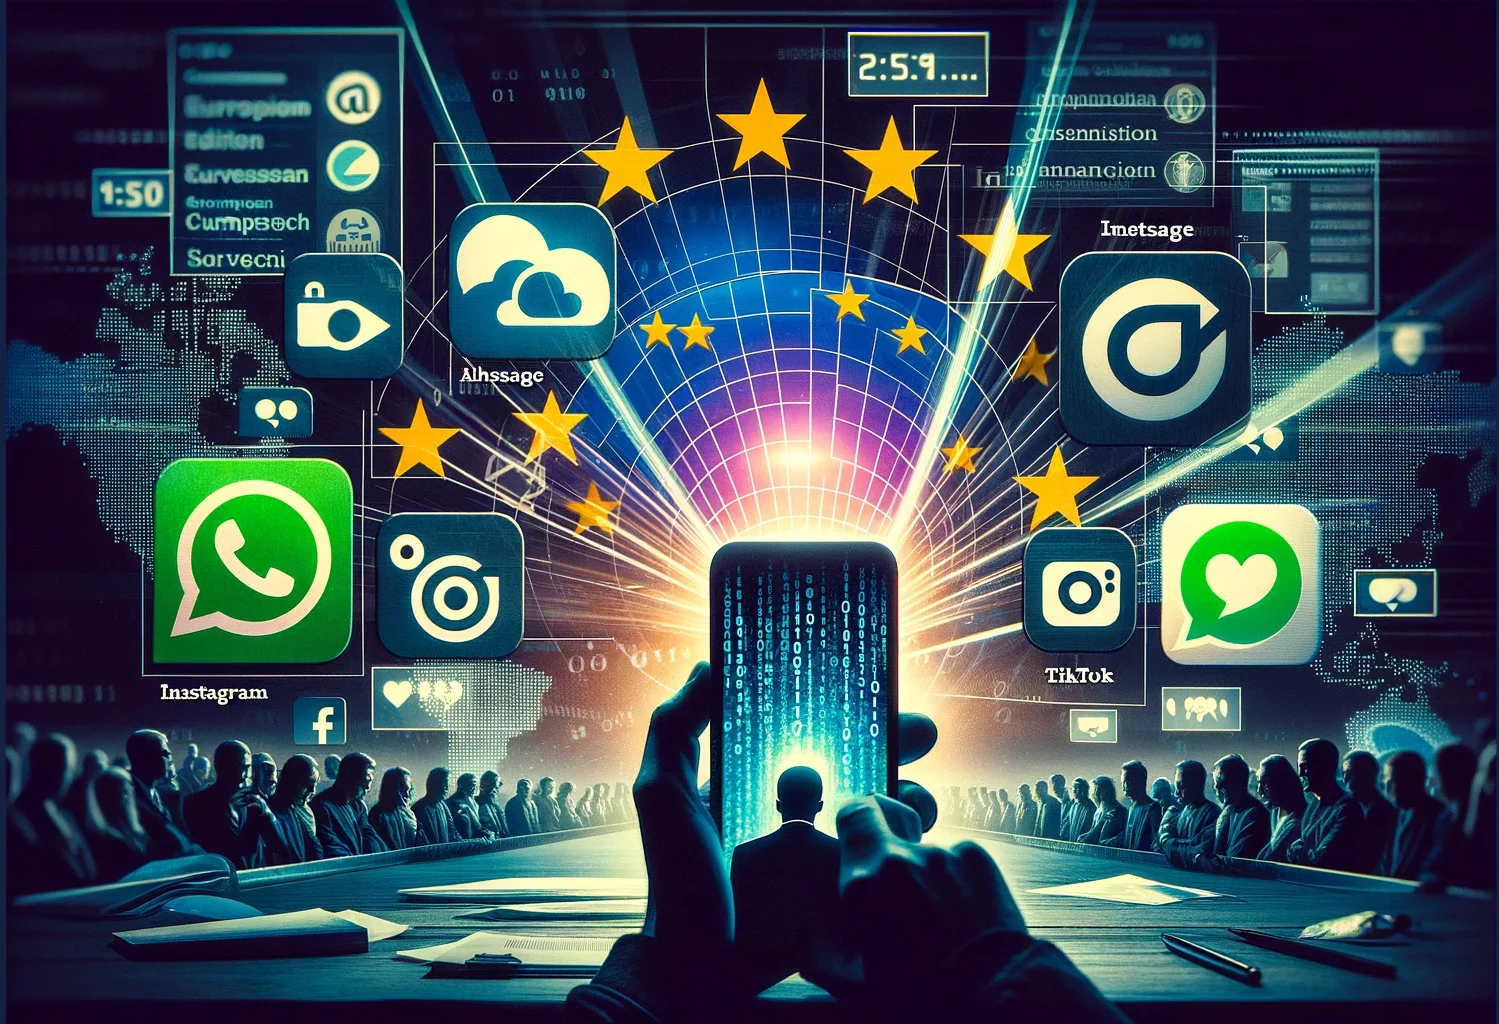 Undermining Democracy: The European Commission’s Controversial Push for Digital Surveillance